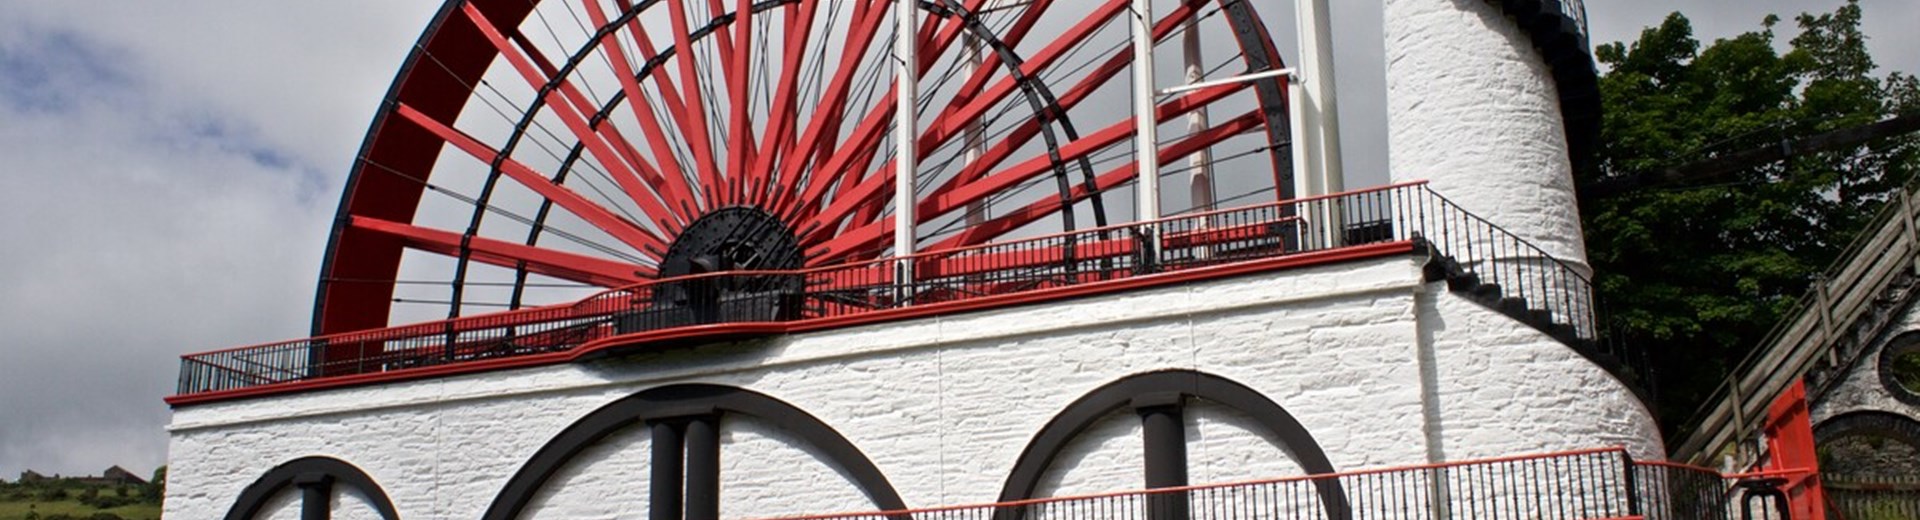 Laxey Wheel Isle Of Man. A large red and white waterwheel used to pump water. 